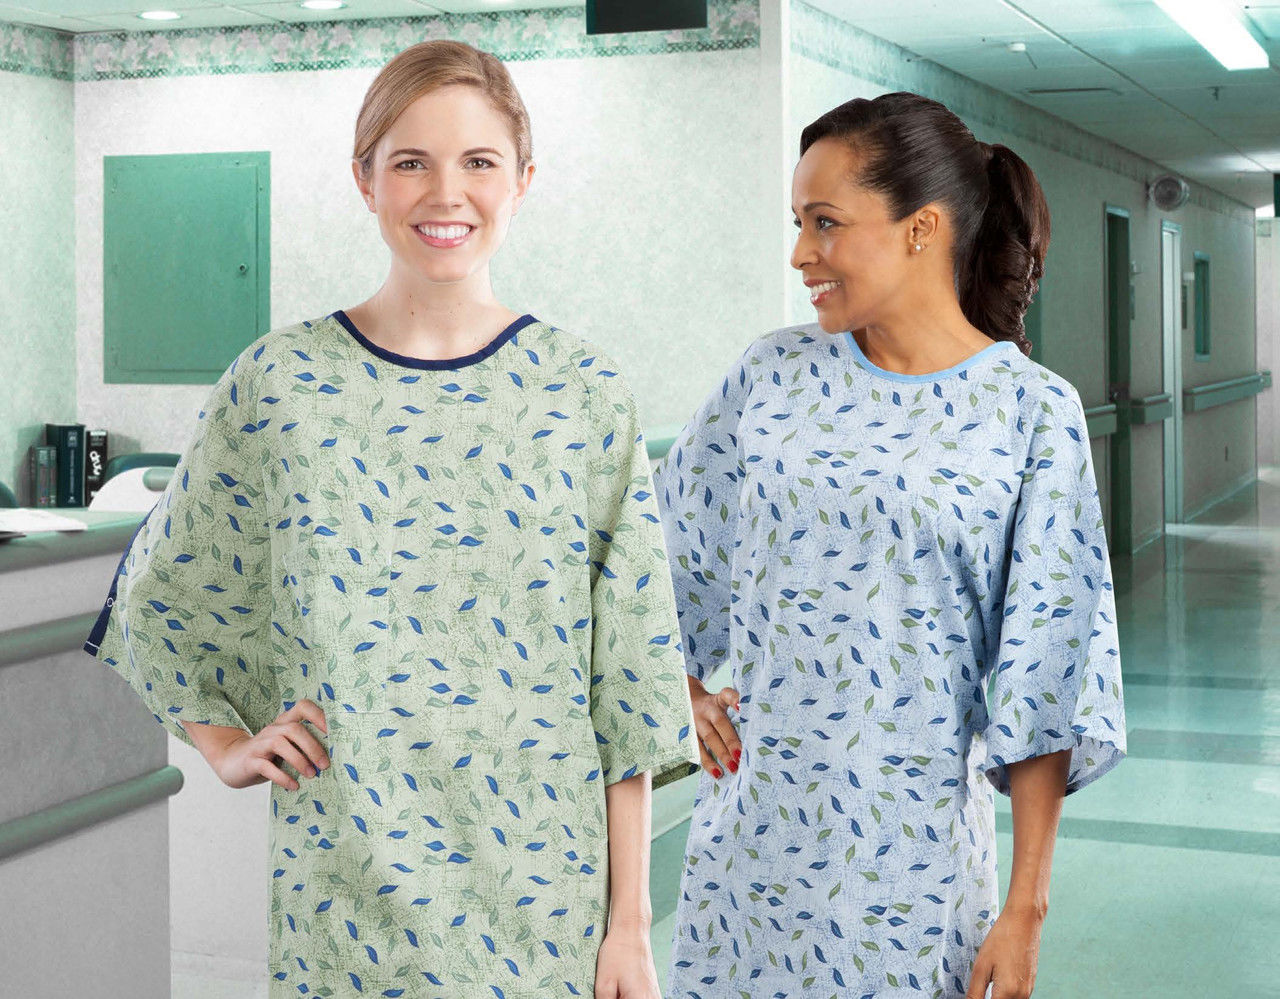 What material is used to make surgical gowns?